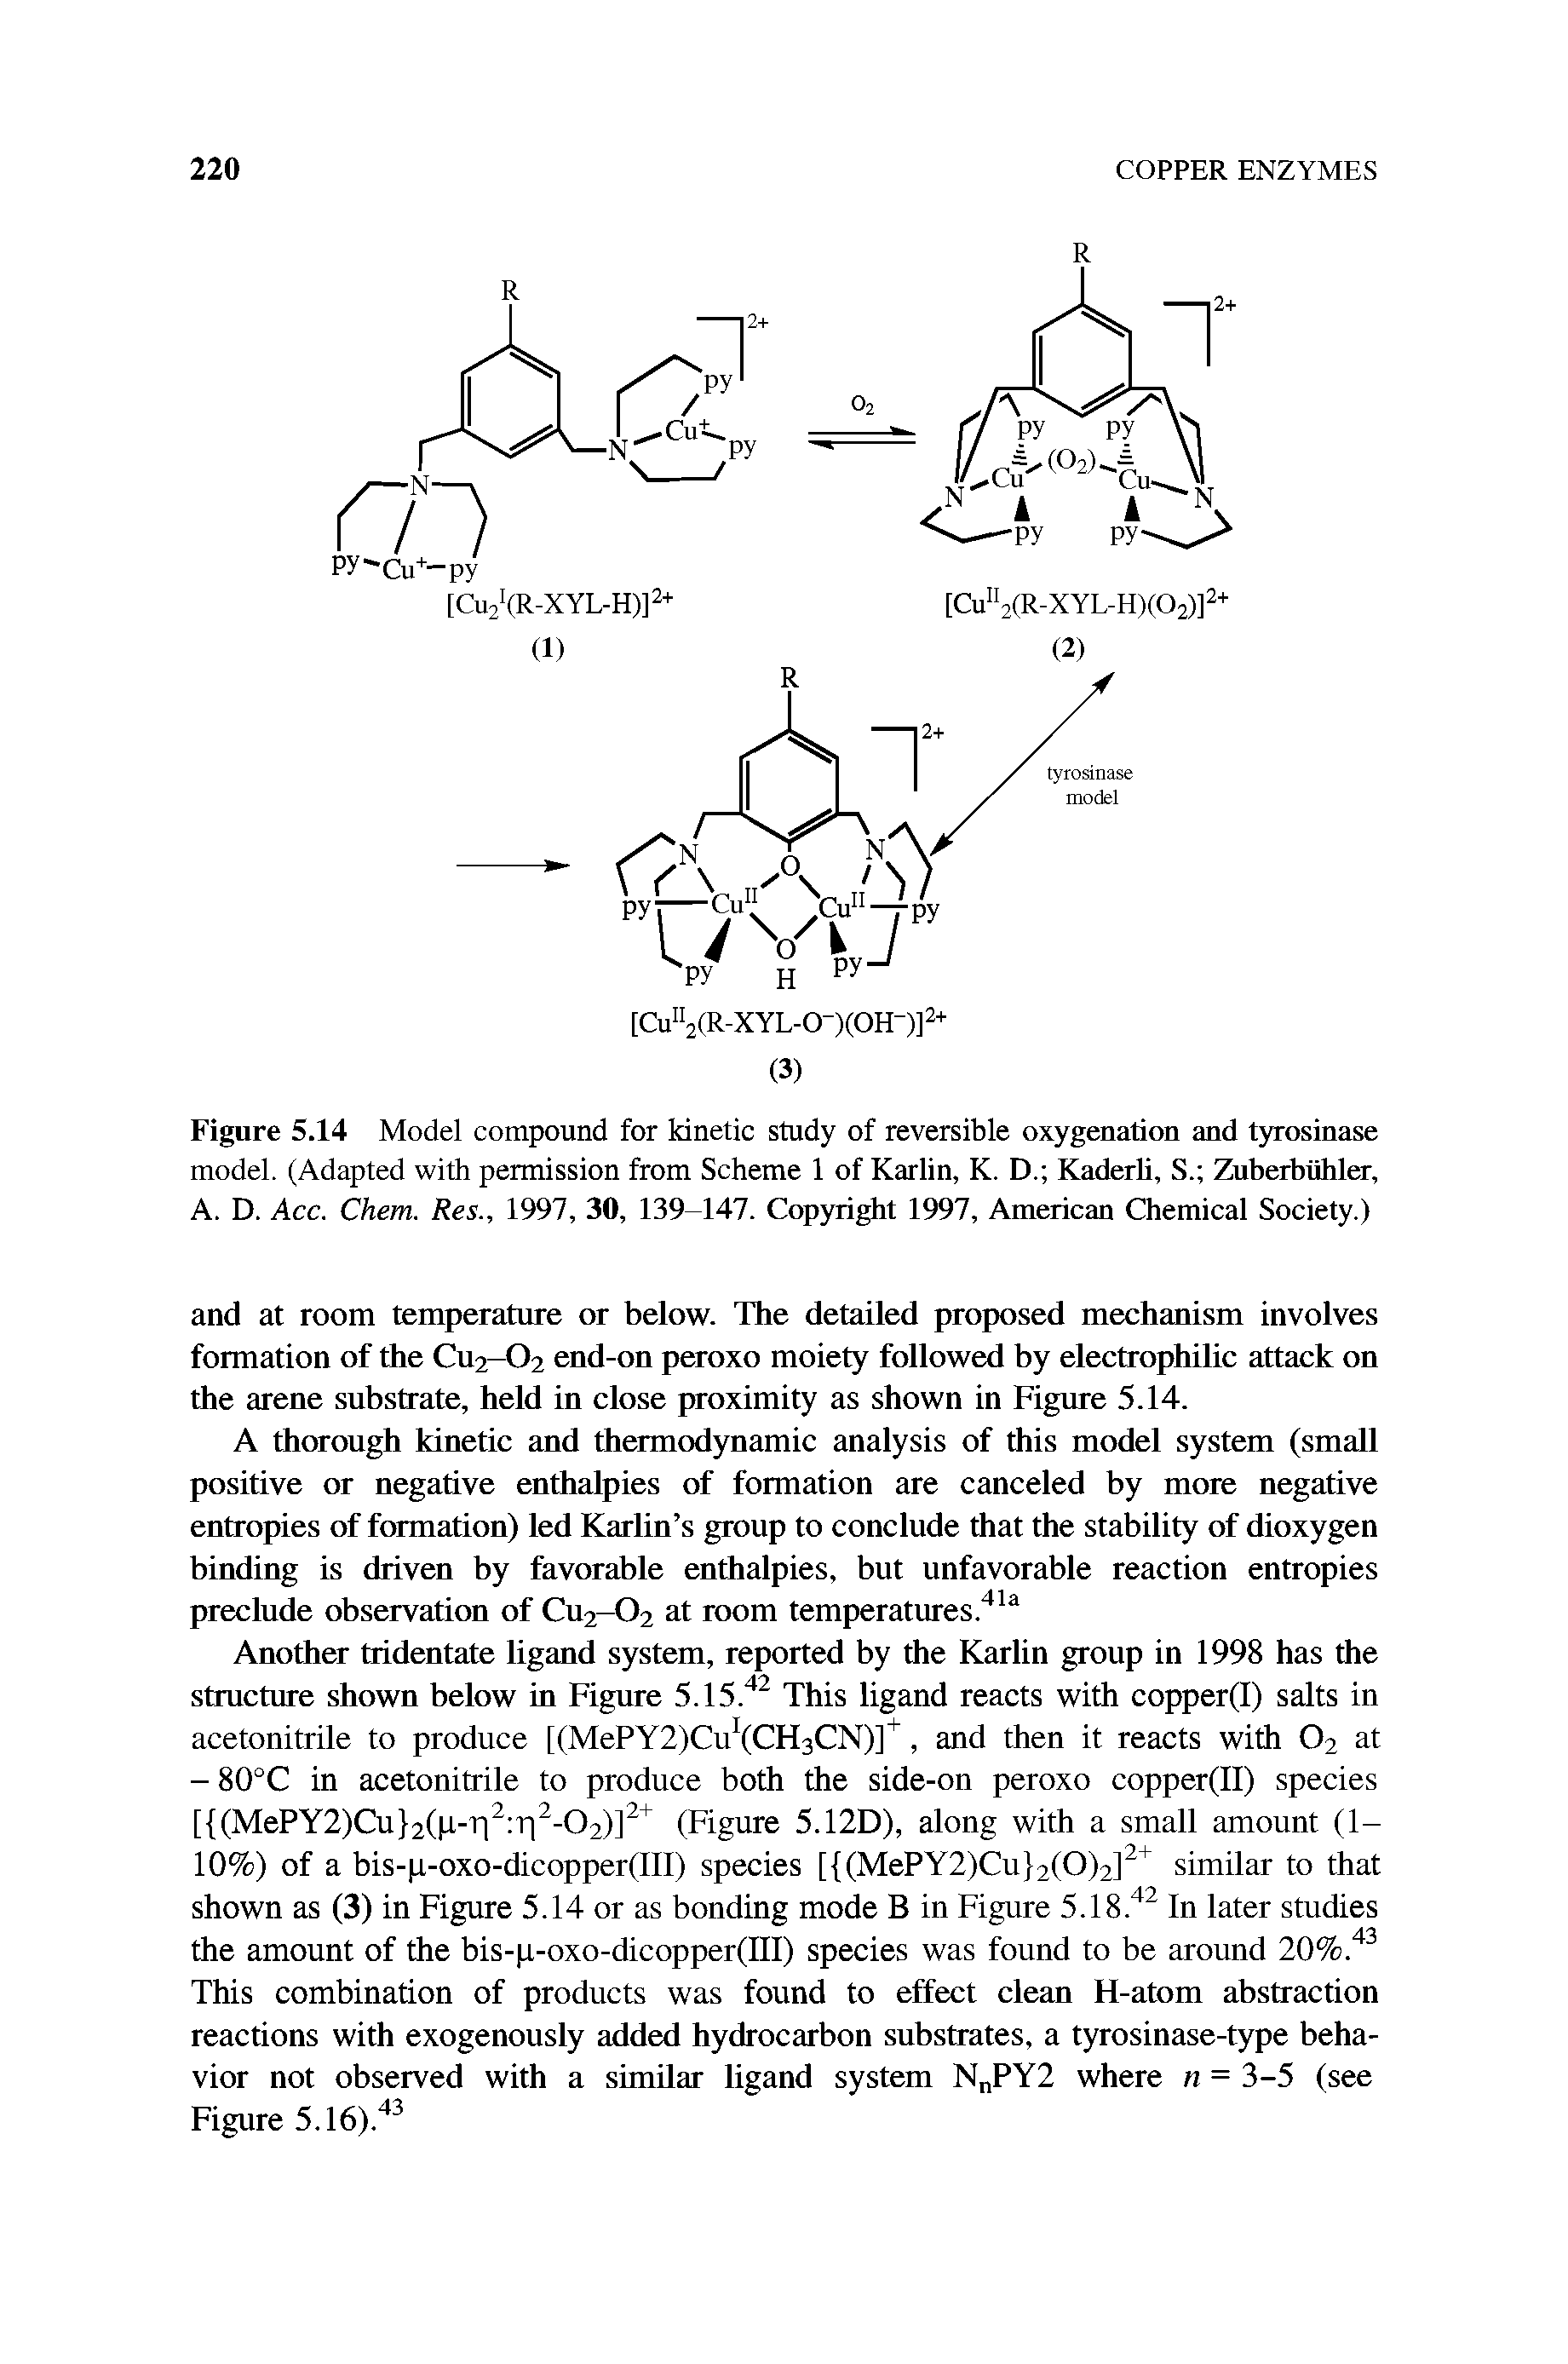 Figure 5.14 Model compound for kinetic study of reversible oxygenation and tyrosinase model. (Adapted with permission from Scheme 1 of Karlin, K. D. Kaderli, S. Zuberbuhler, A. D. Acc. Chem. Res., 1997, 30, 139-147. Copyright 1997, American Chemical Society.)...